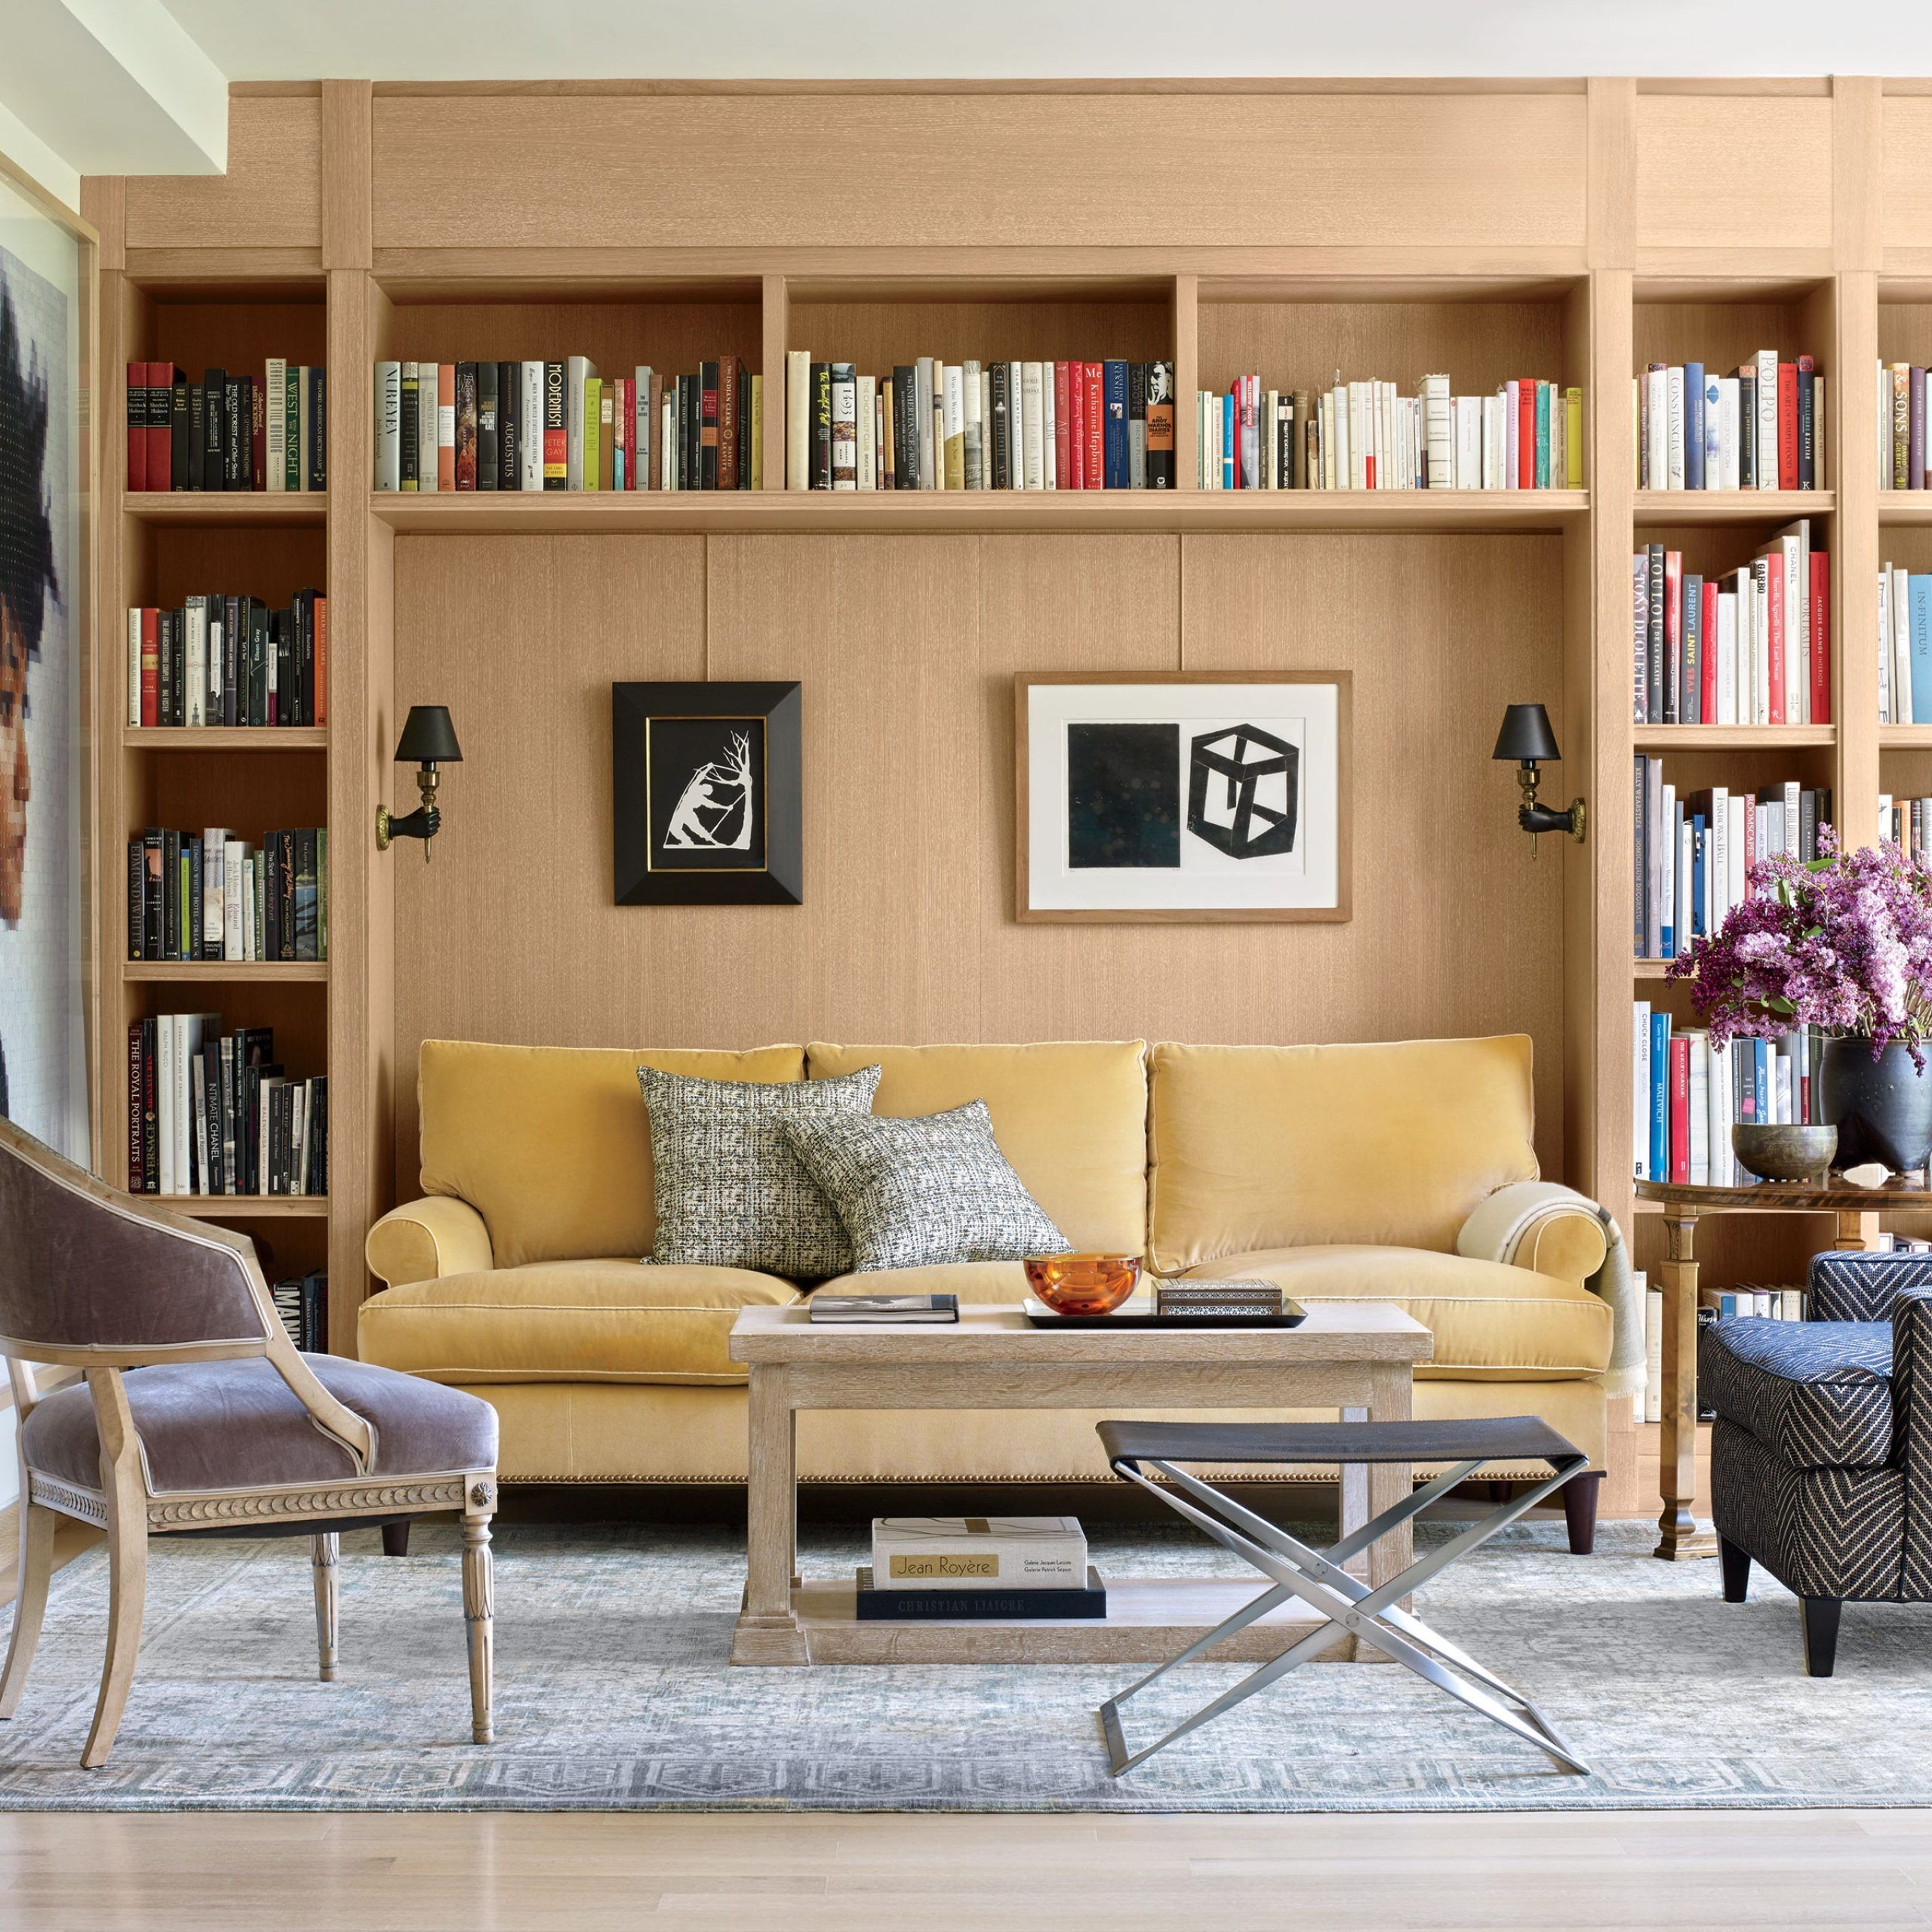 How To Decorate A Bookshelf: 25 Stylish Design Tips For Your Bookcases |  Architectural Digest Pertaining To Mirrored Bookcases With 3 Shelves (View 11 of 15)